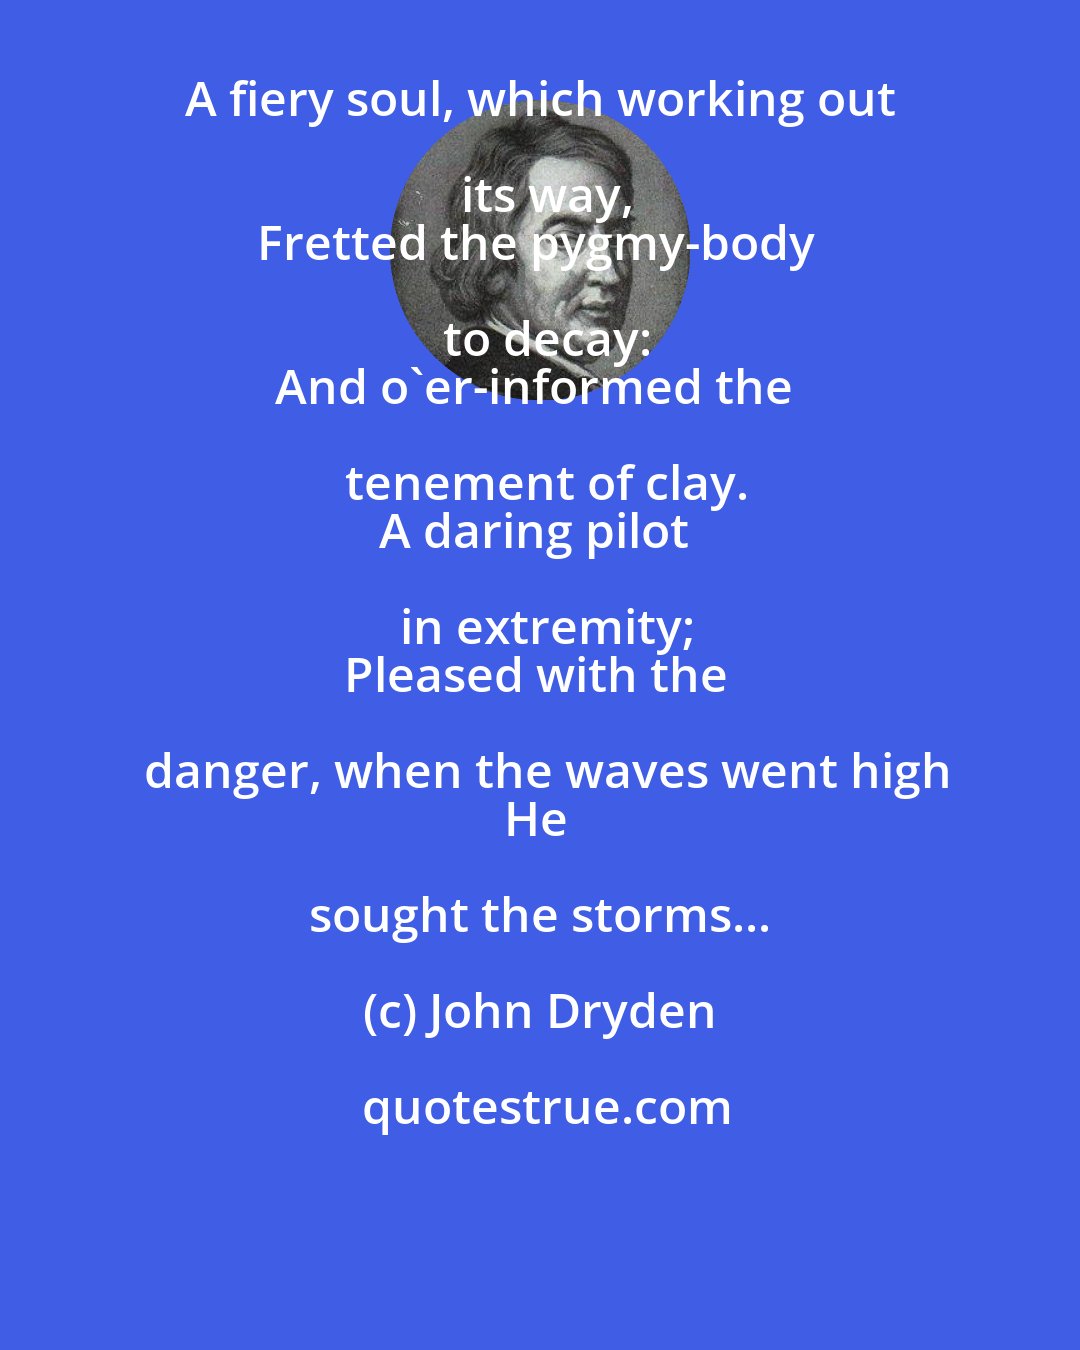 John Dryden: A fiery soul, which working out its way,
Fretted the pygmy-body to decay:
And o'er-informed the tenement of clay.
A daring pilot in extremity;
Pleased with the danger, when the waves went high
He sought the storms...